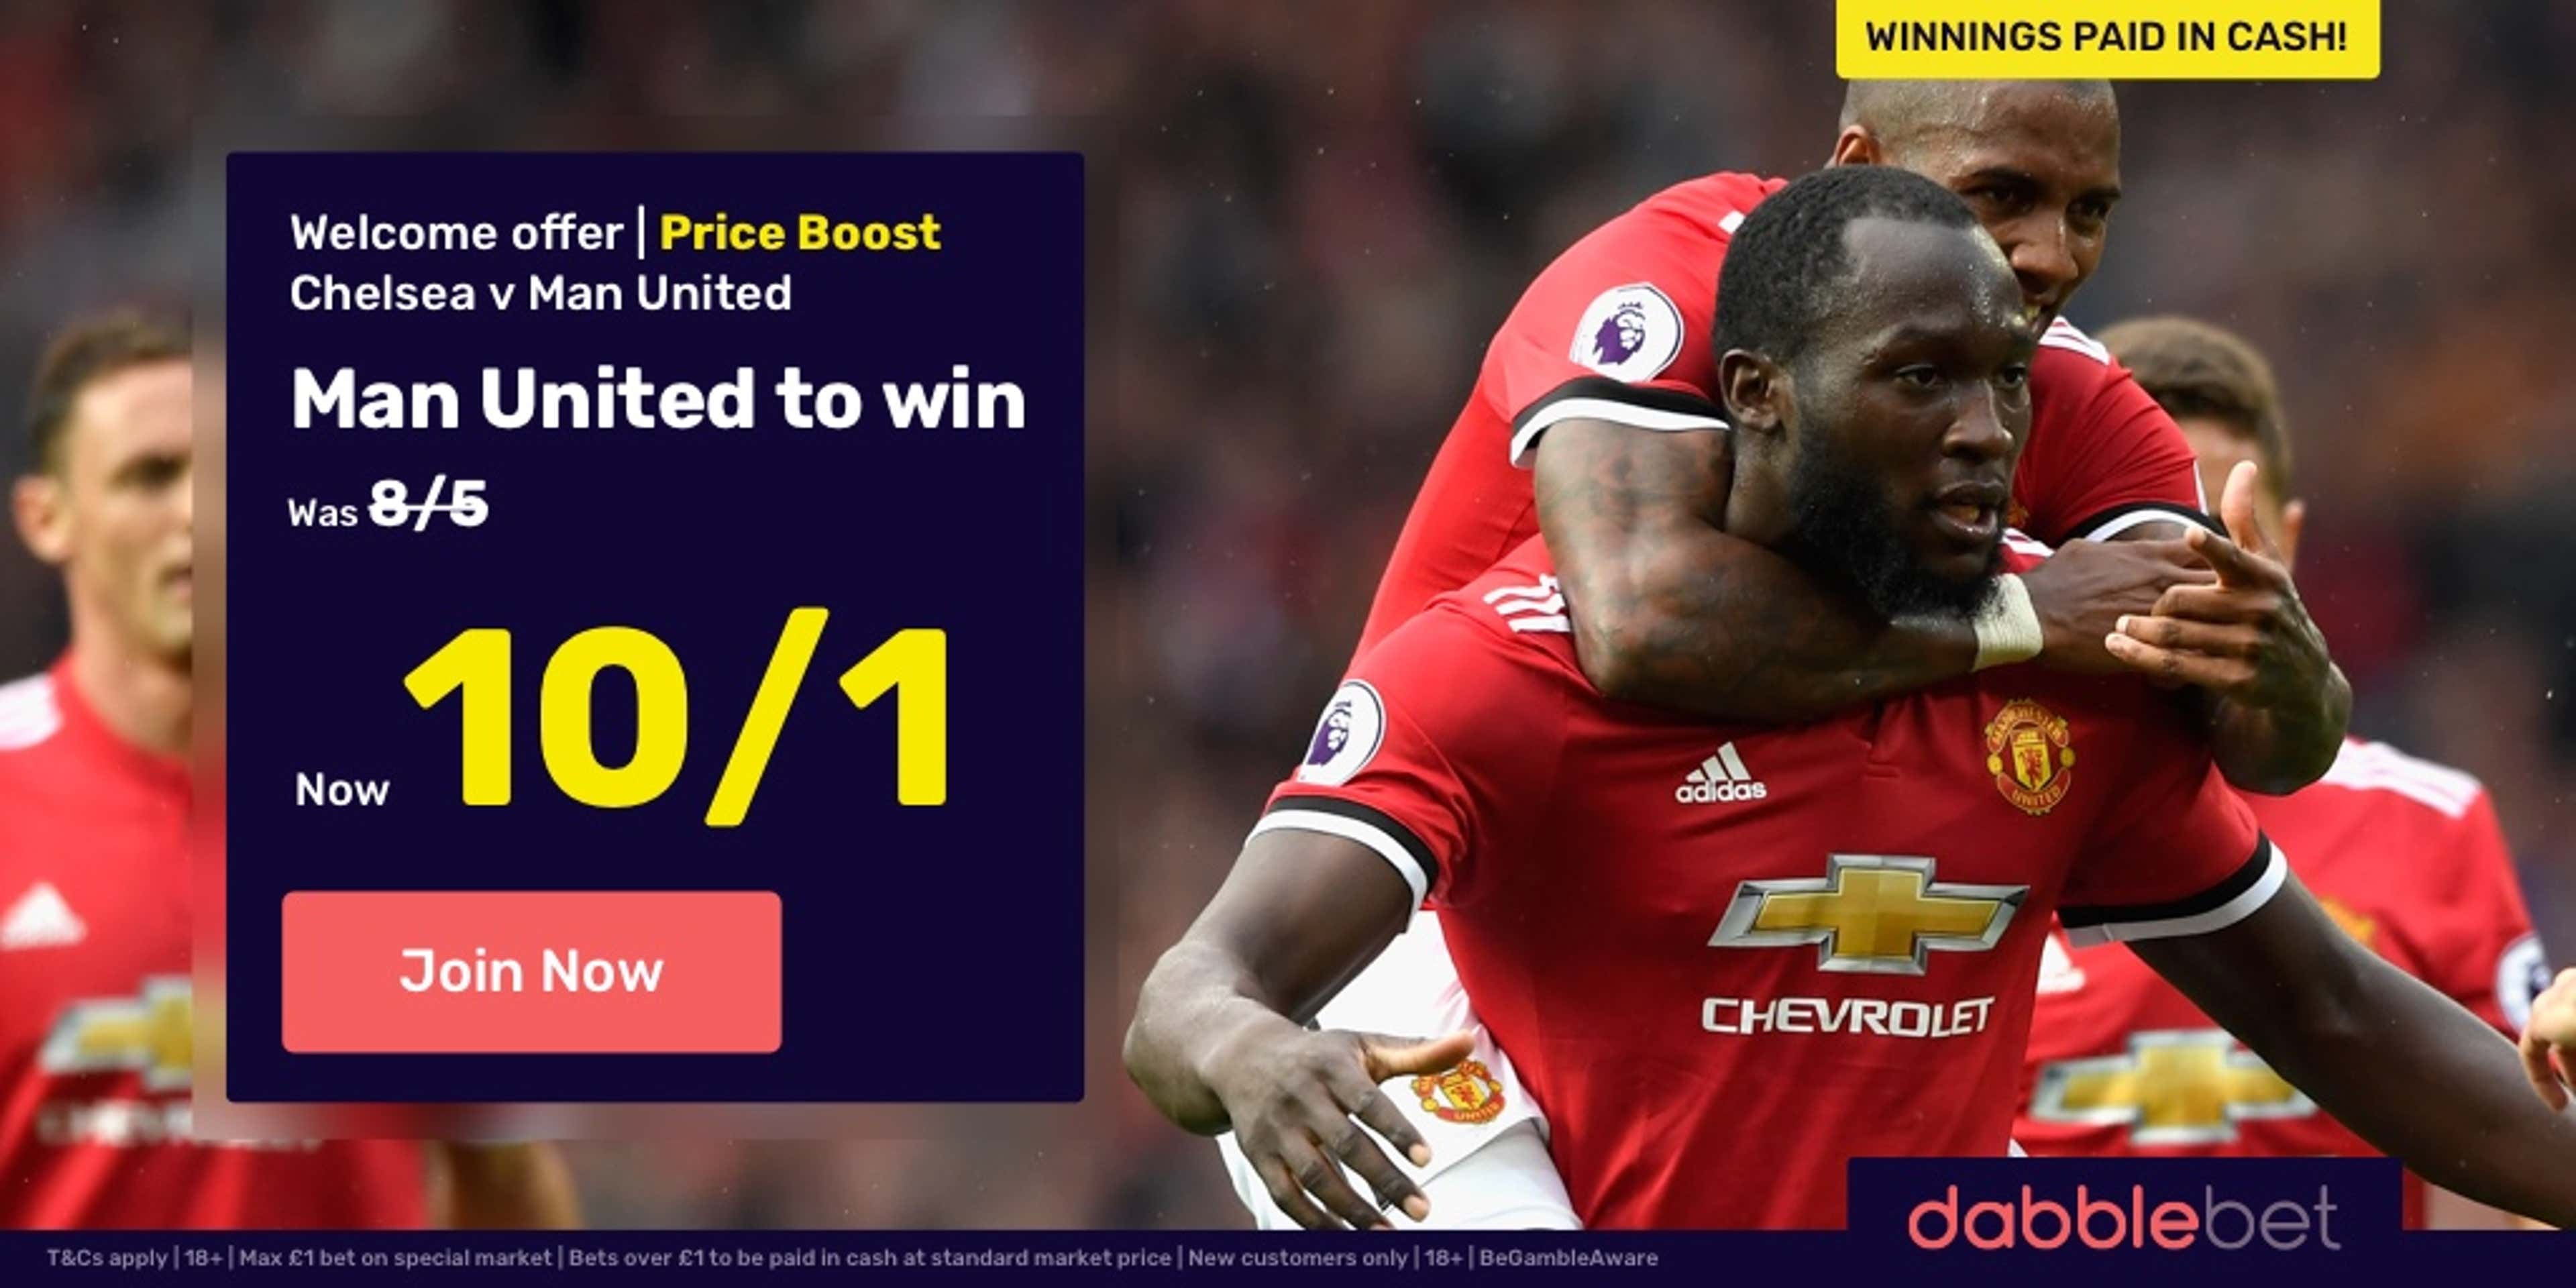 dabblebet Manchester United FA Cup final offer HP